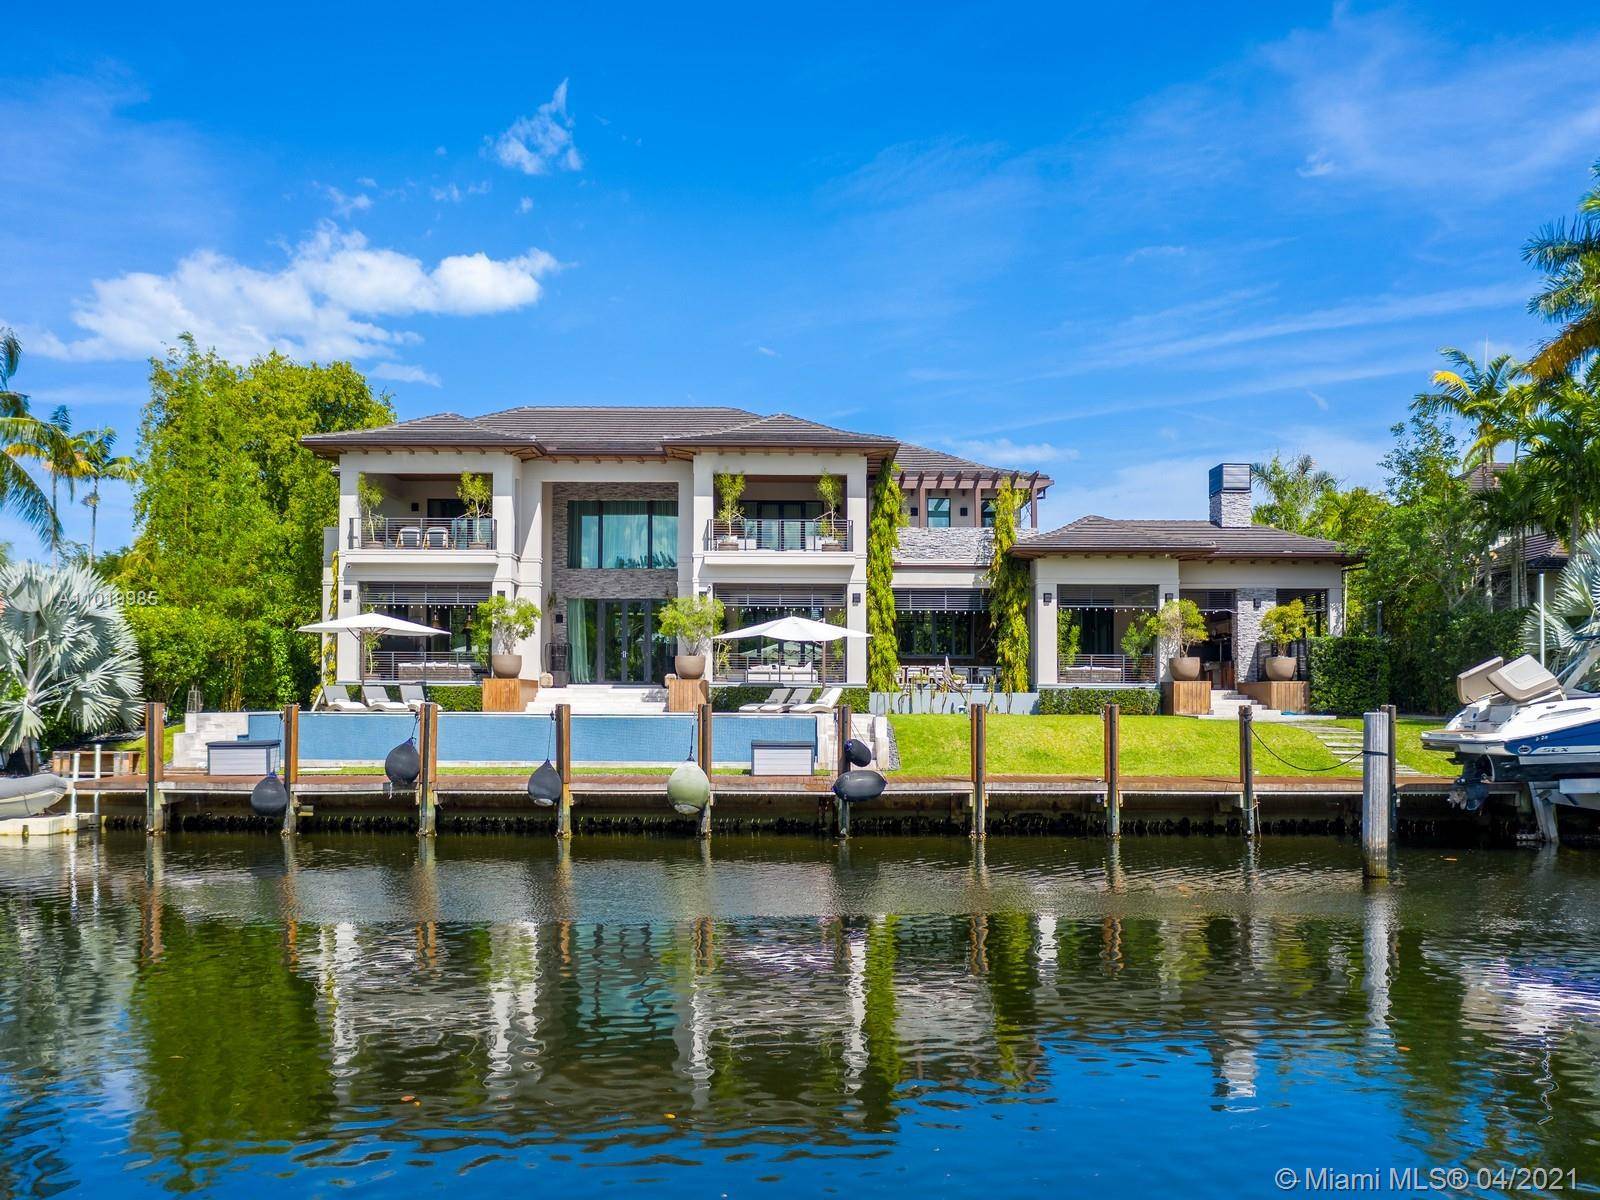 Dream CLASSIC CONTEMPORARY WATERFRONT home in the exclusive GATED Community of Old Cutler Bay in CORAL GABLES.